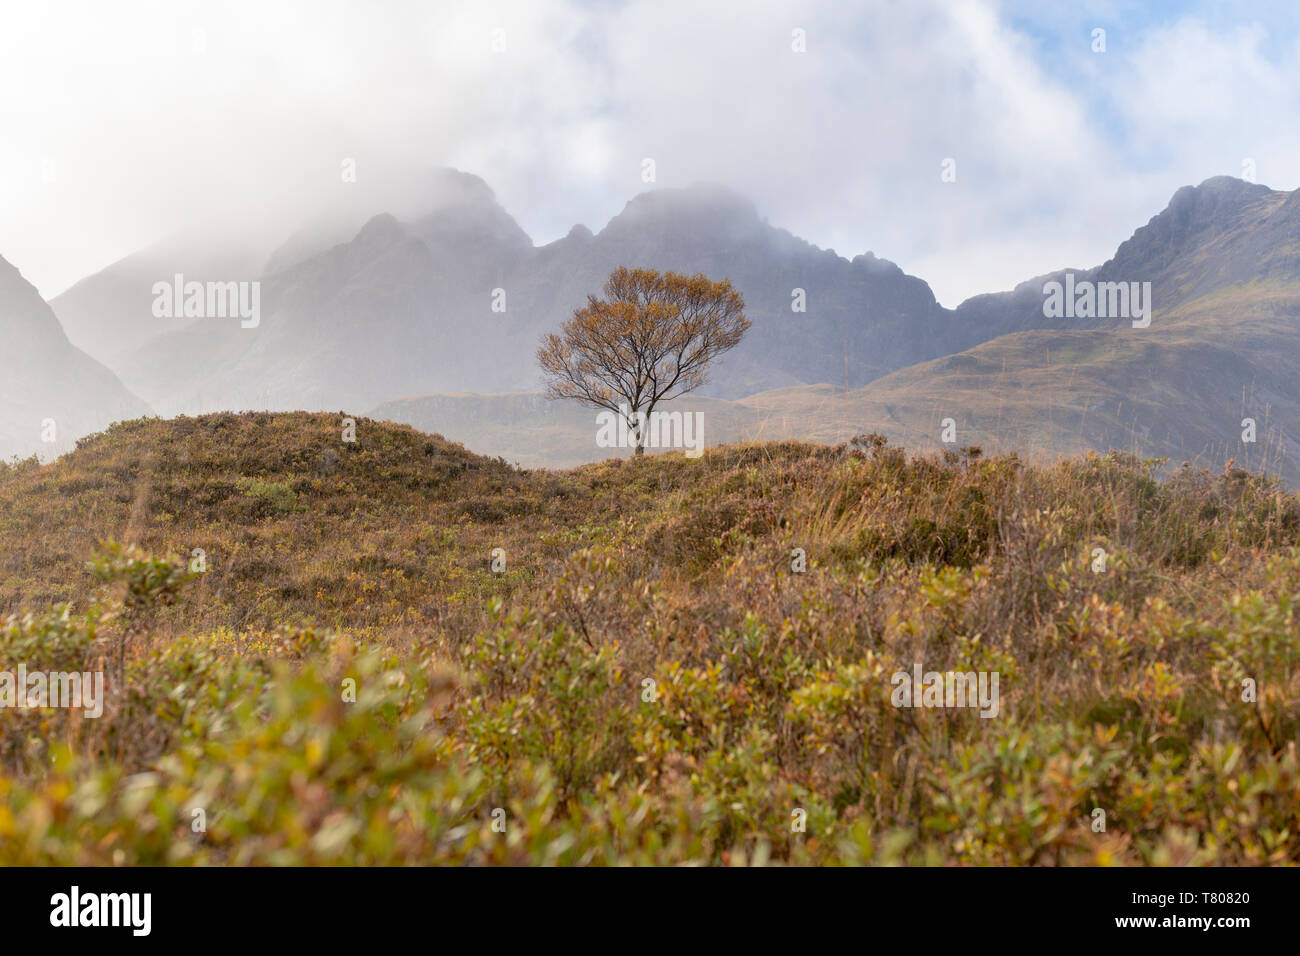 A lone tree and the Cuillins mountains on The Isle of Skye in the Inner Hebrides, Highlands, Scotland, United Kingdom, Europe Stock Photo